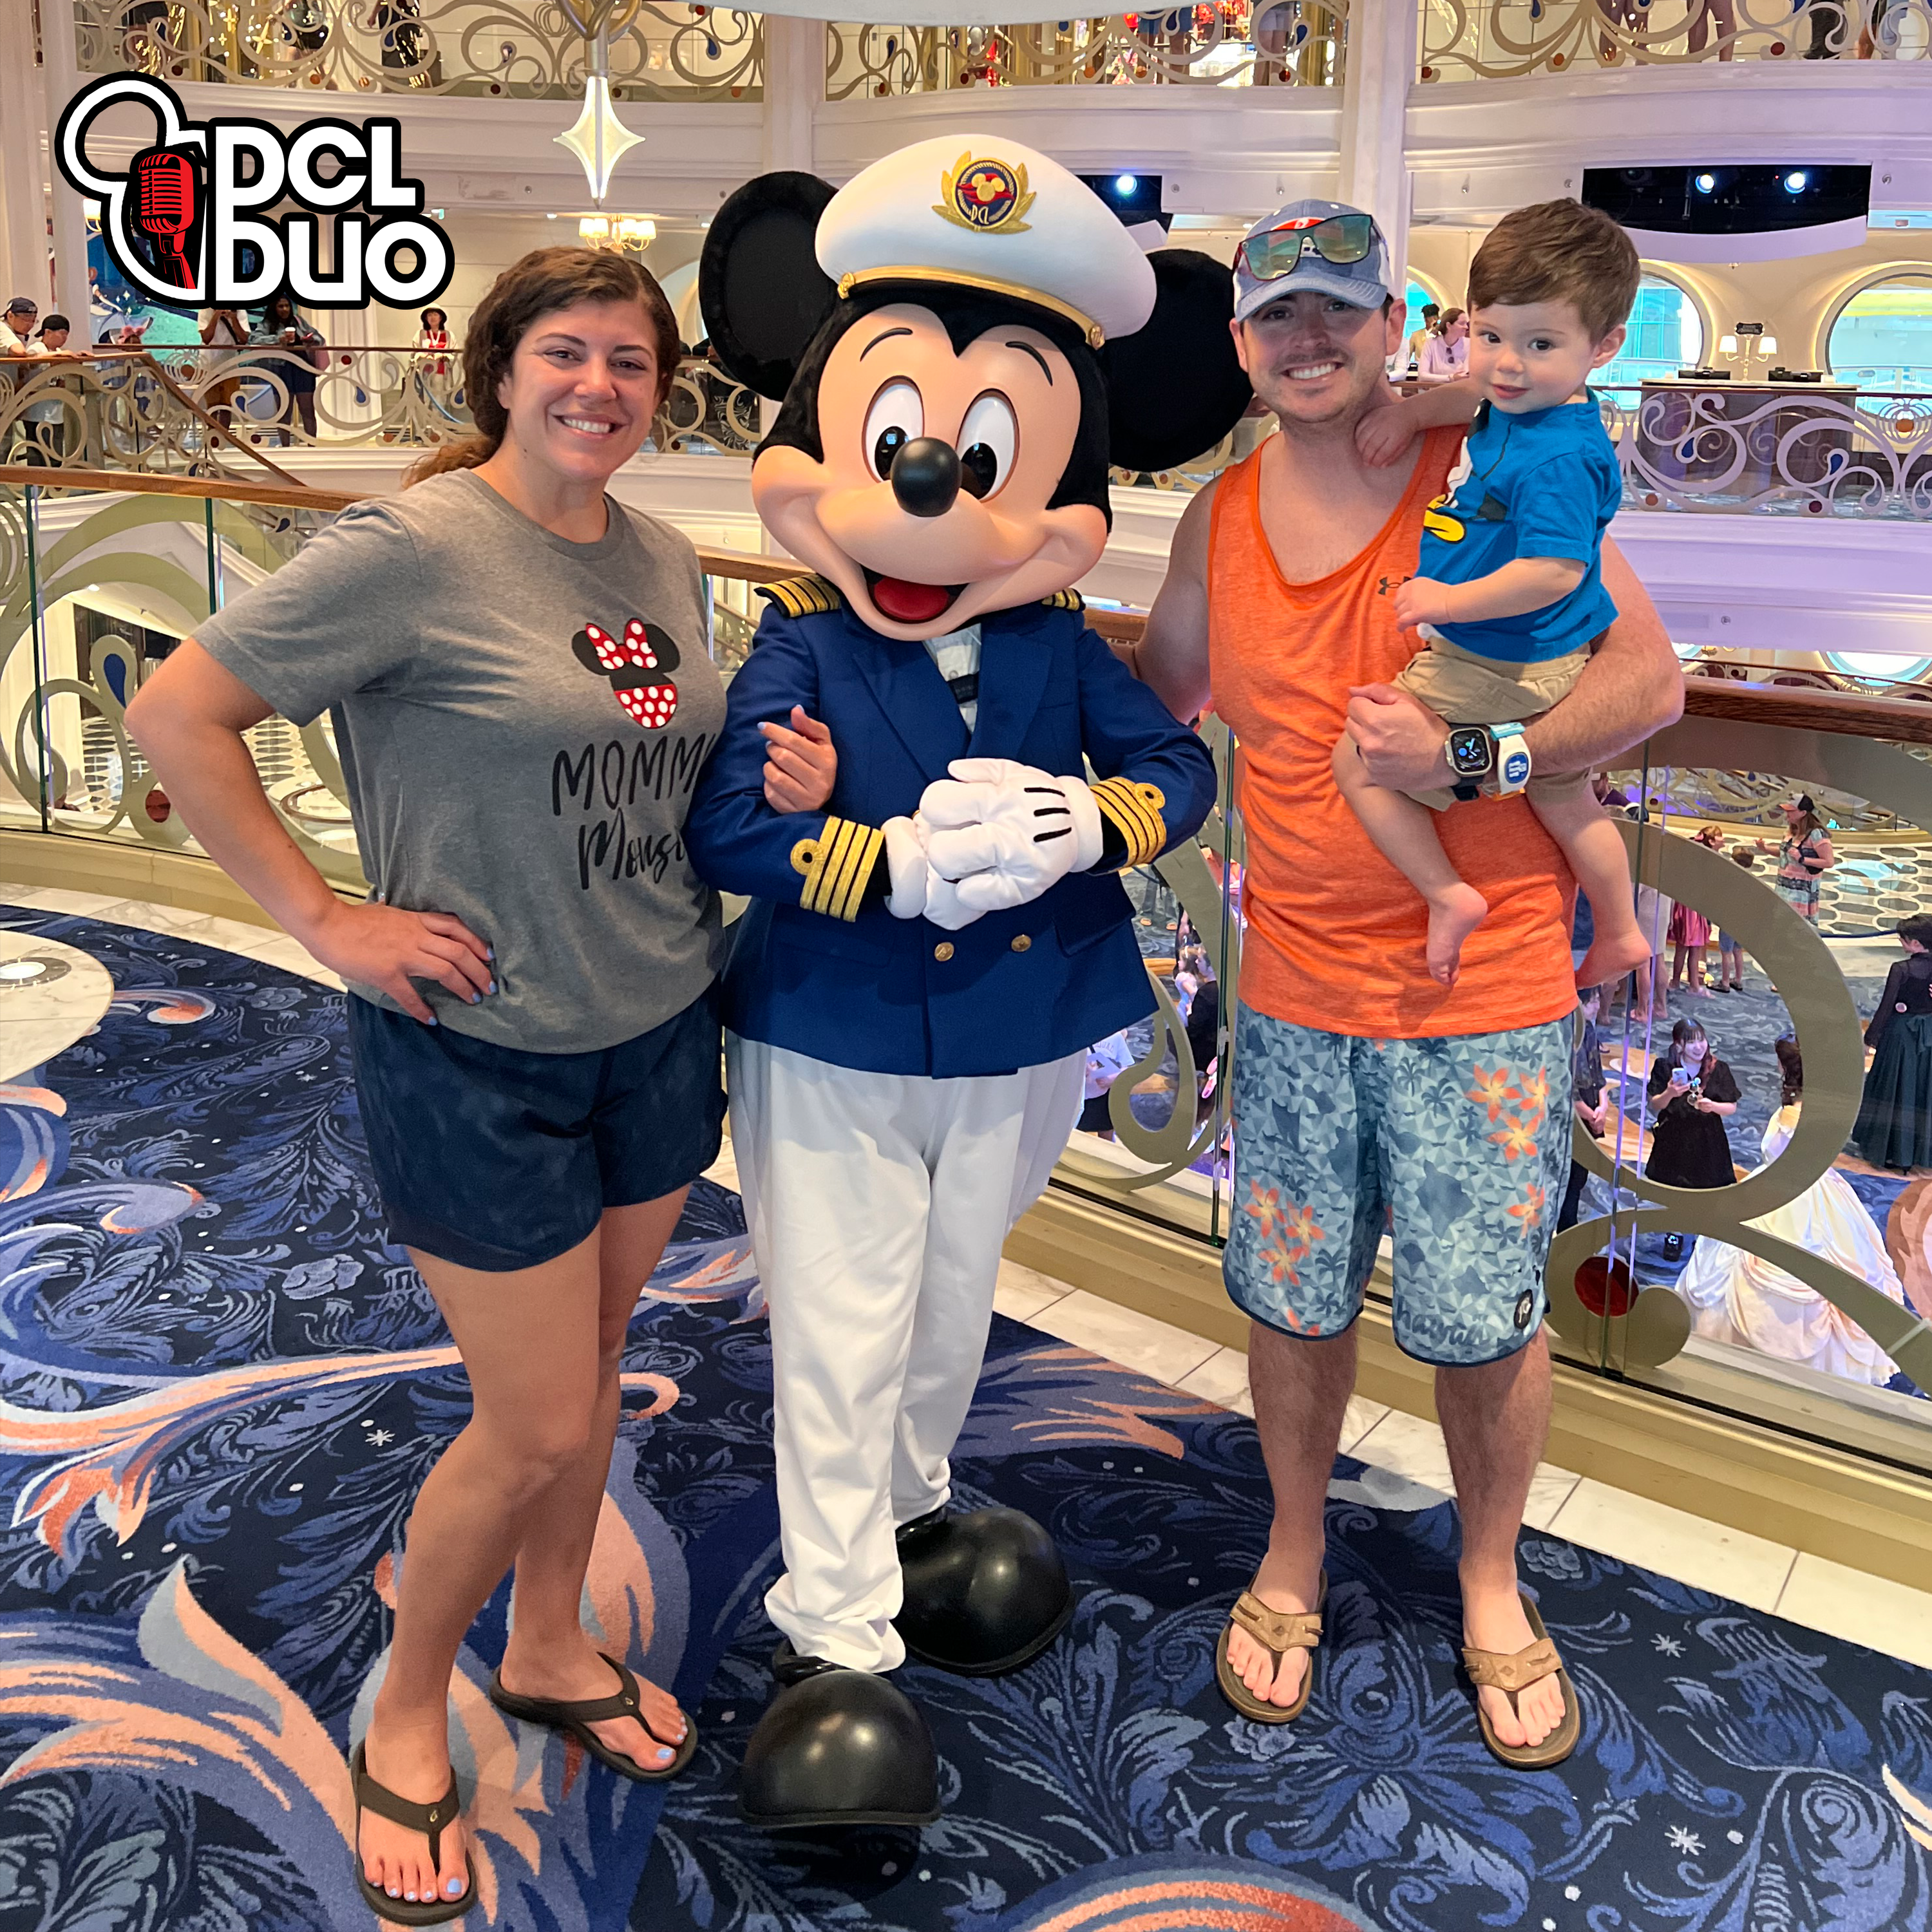 Ep. 433 - Jack Jack!: Tips for Sailing with Little Kids on Disney Cruise Line